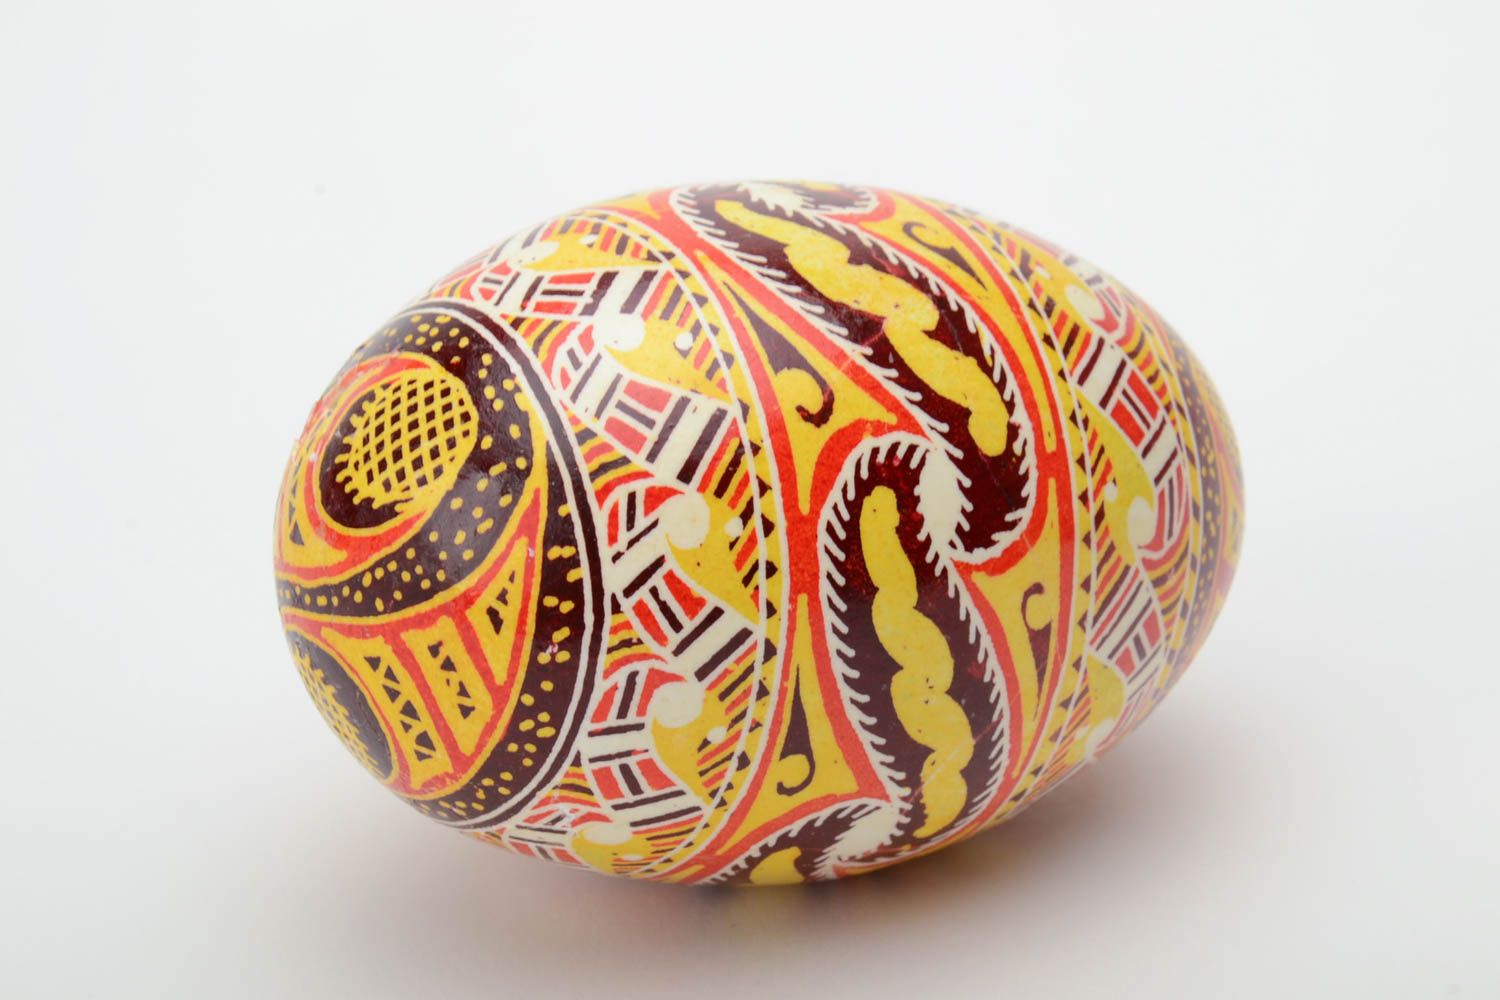 Homemade designer decorative Easter egg pysanka painted with wax and aniline dyes photo 4